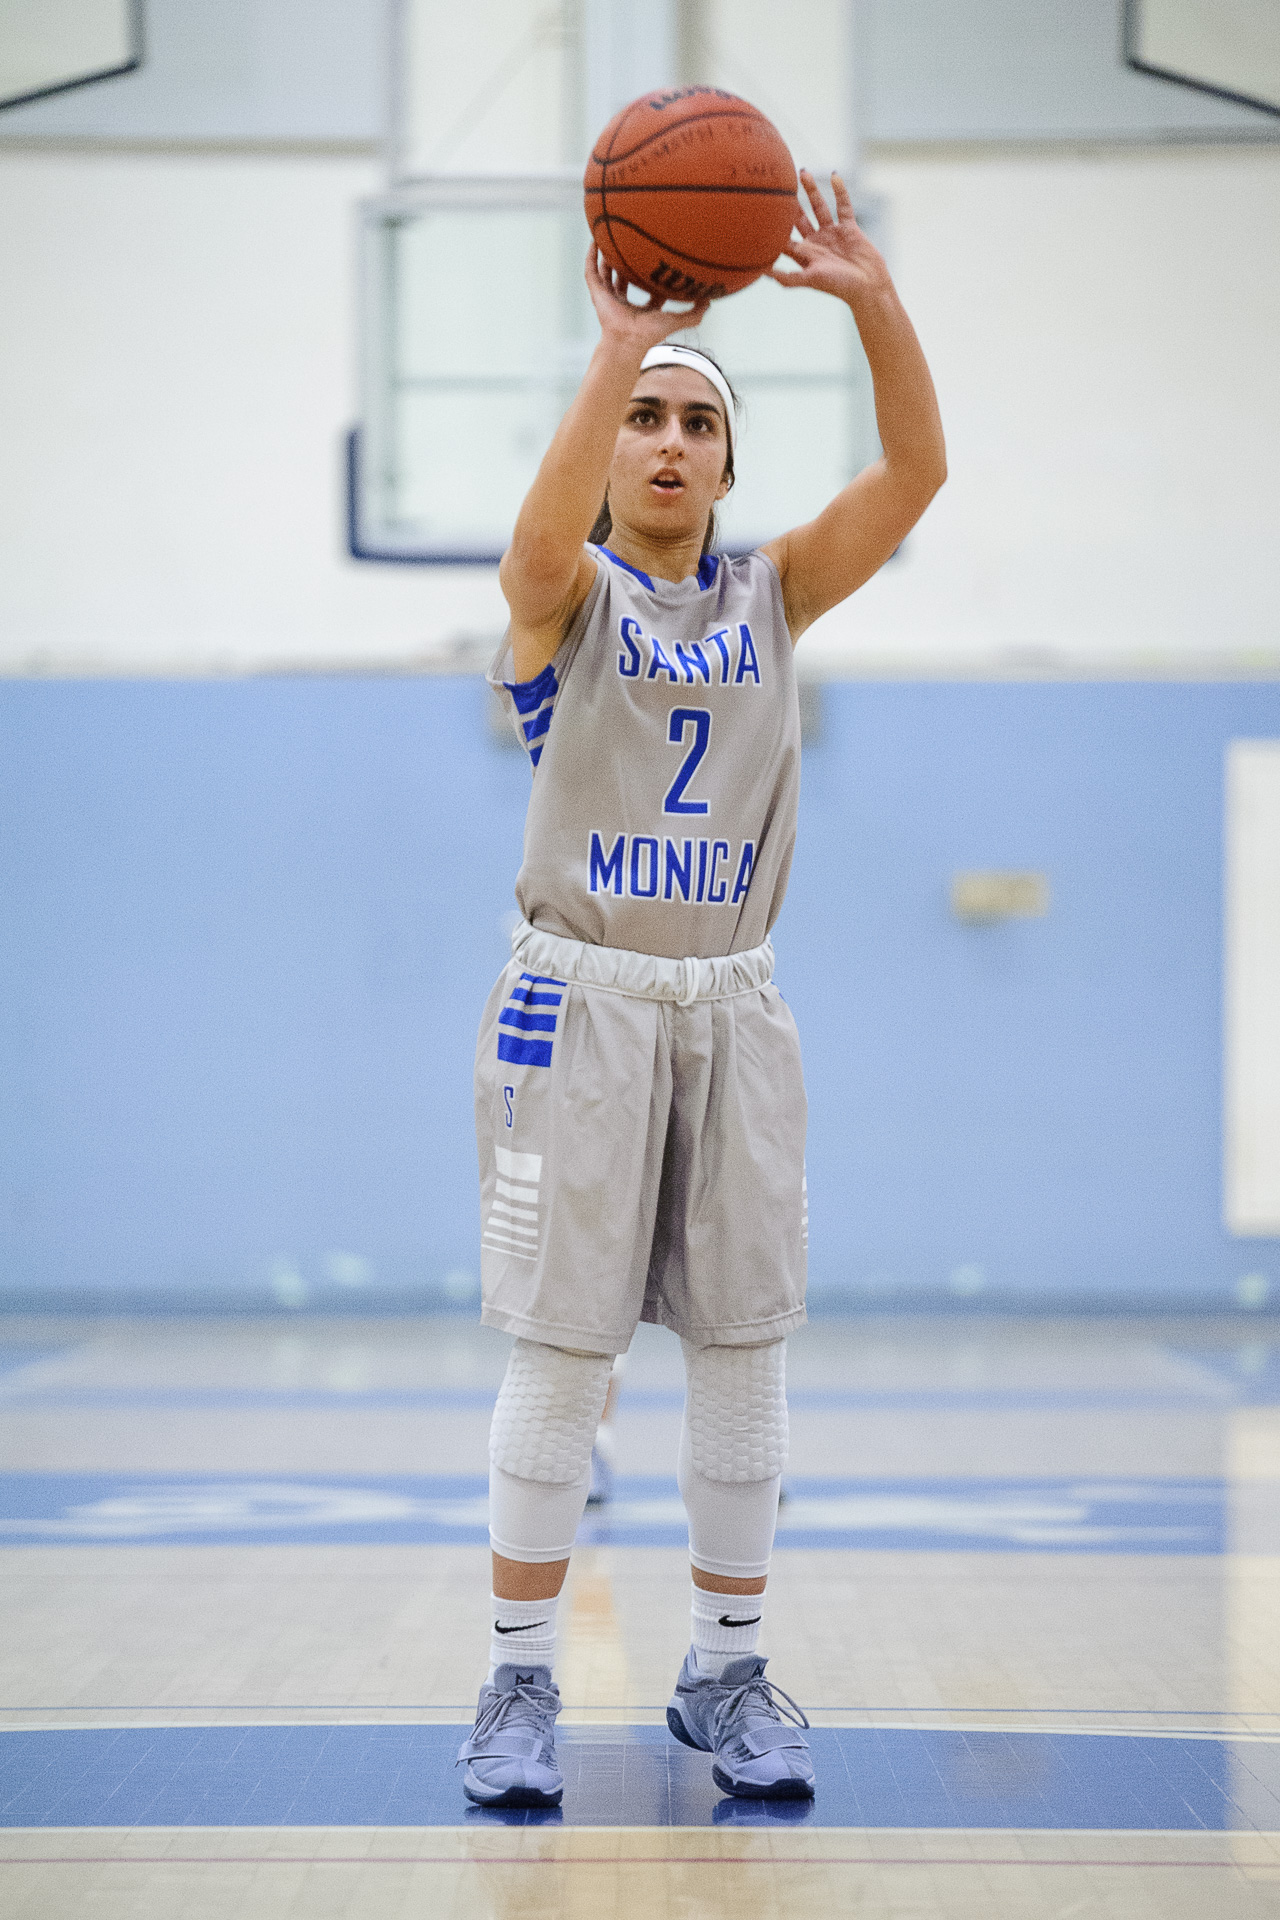  Guard Jessica Melamed (2) of Santa Monica College shoots free throws after getting fouled in the act of shooting. The Santa Monica College Corsairs lose the game 62-72 to the Bakersfield College Renegades. The game was held at the SMC Pavilion at th